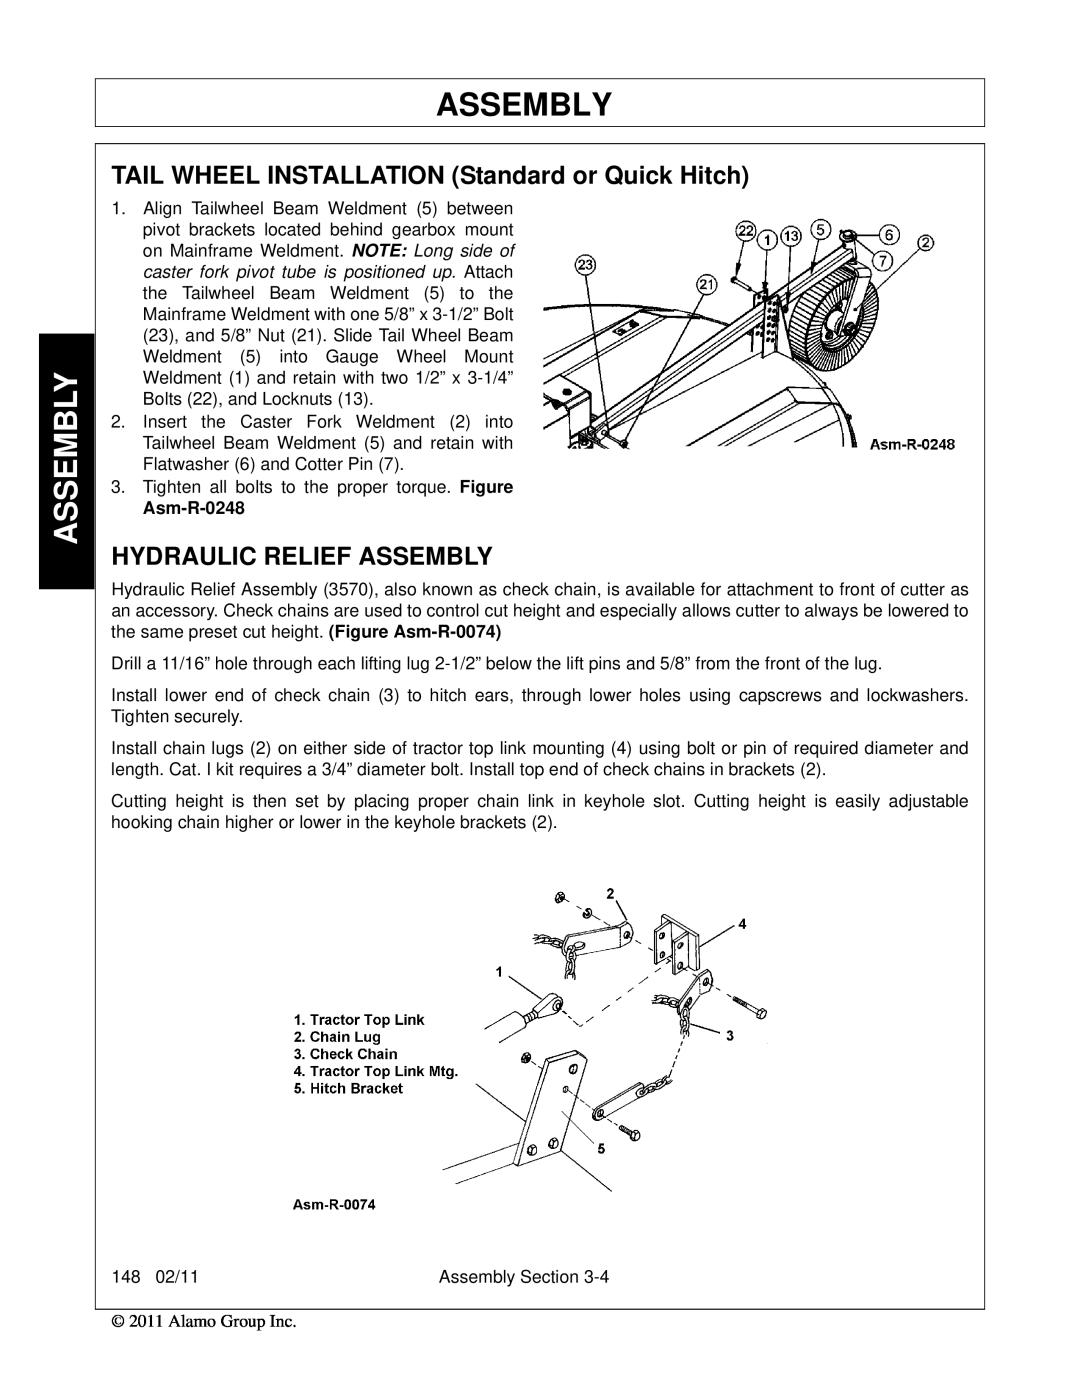 Rhino Mounts 148 manual TAIL WHEEL INSTALLATION Standard or Quick Hitch, Hydraulic Relief Assembly, Asm-R-0248 